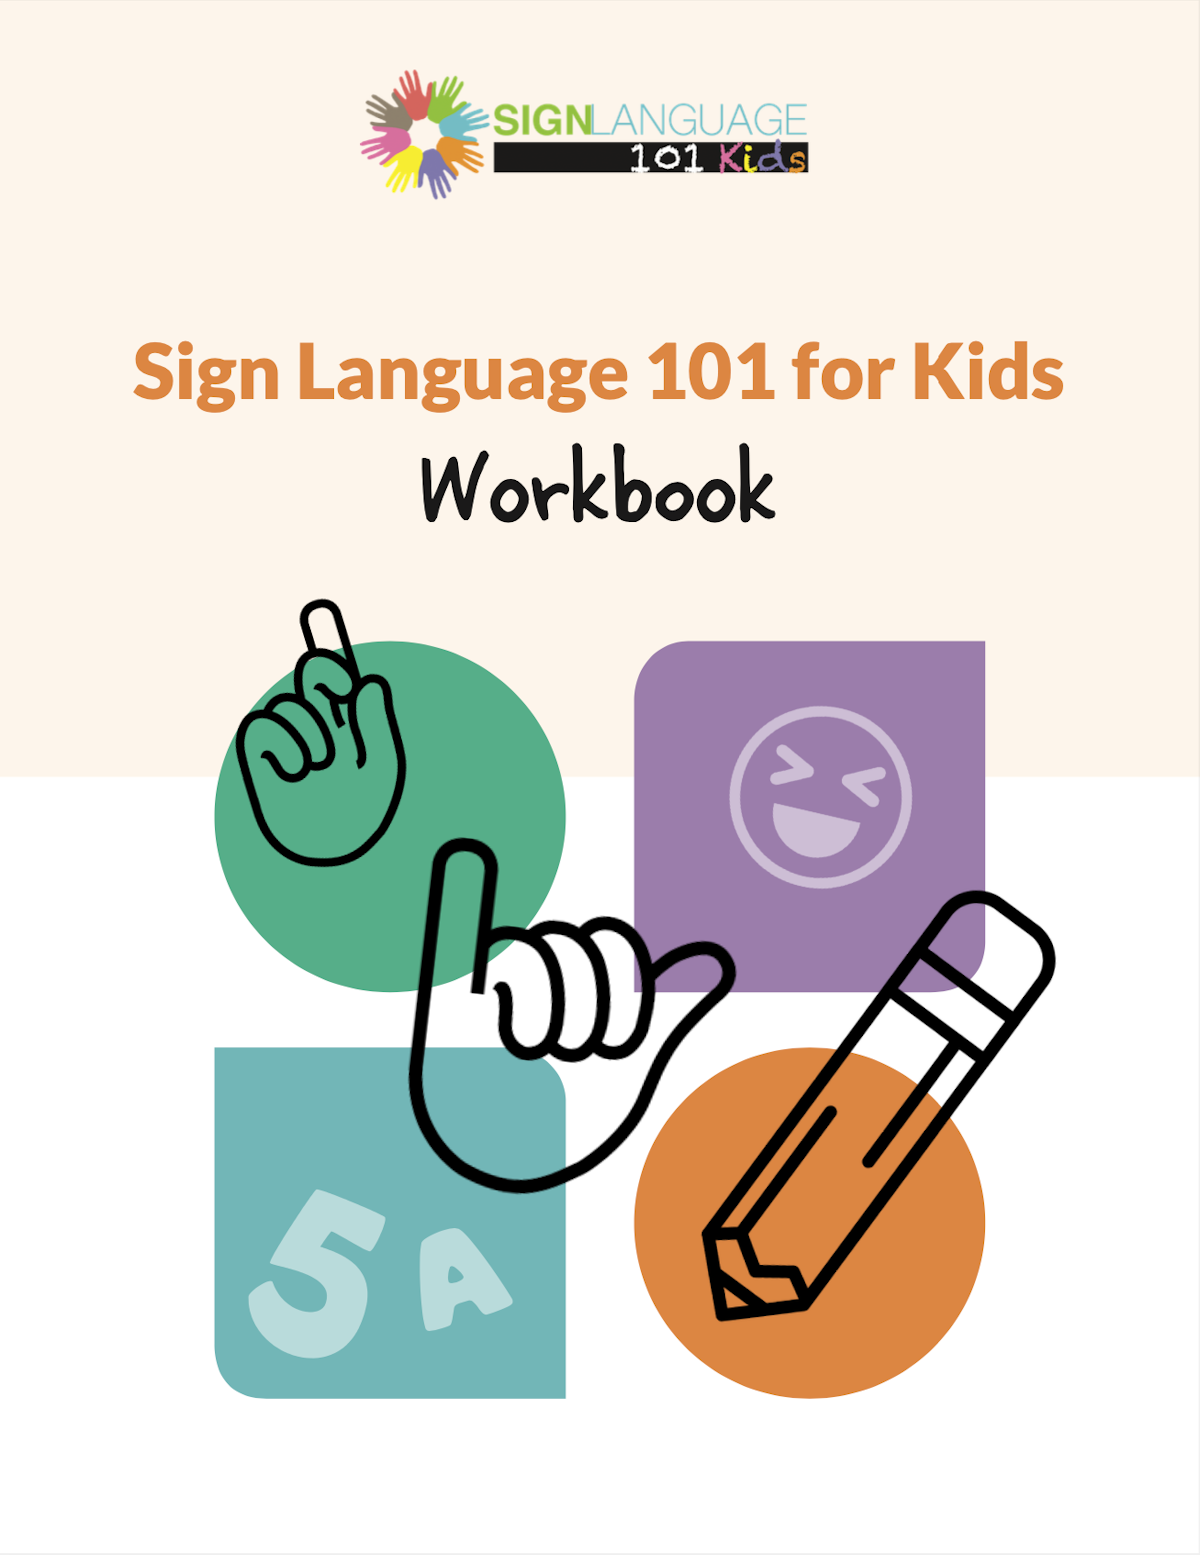 Sign Language 101 for Kids - Course Workbook cover